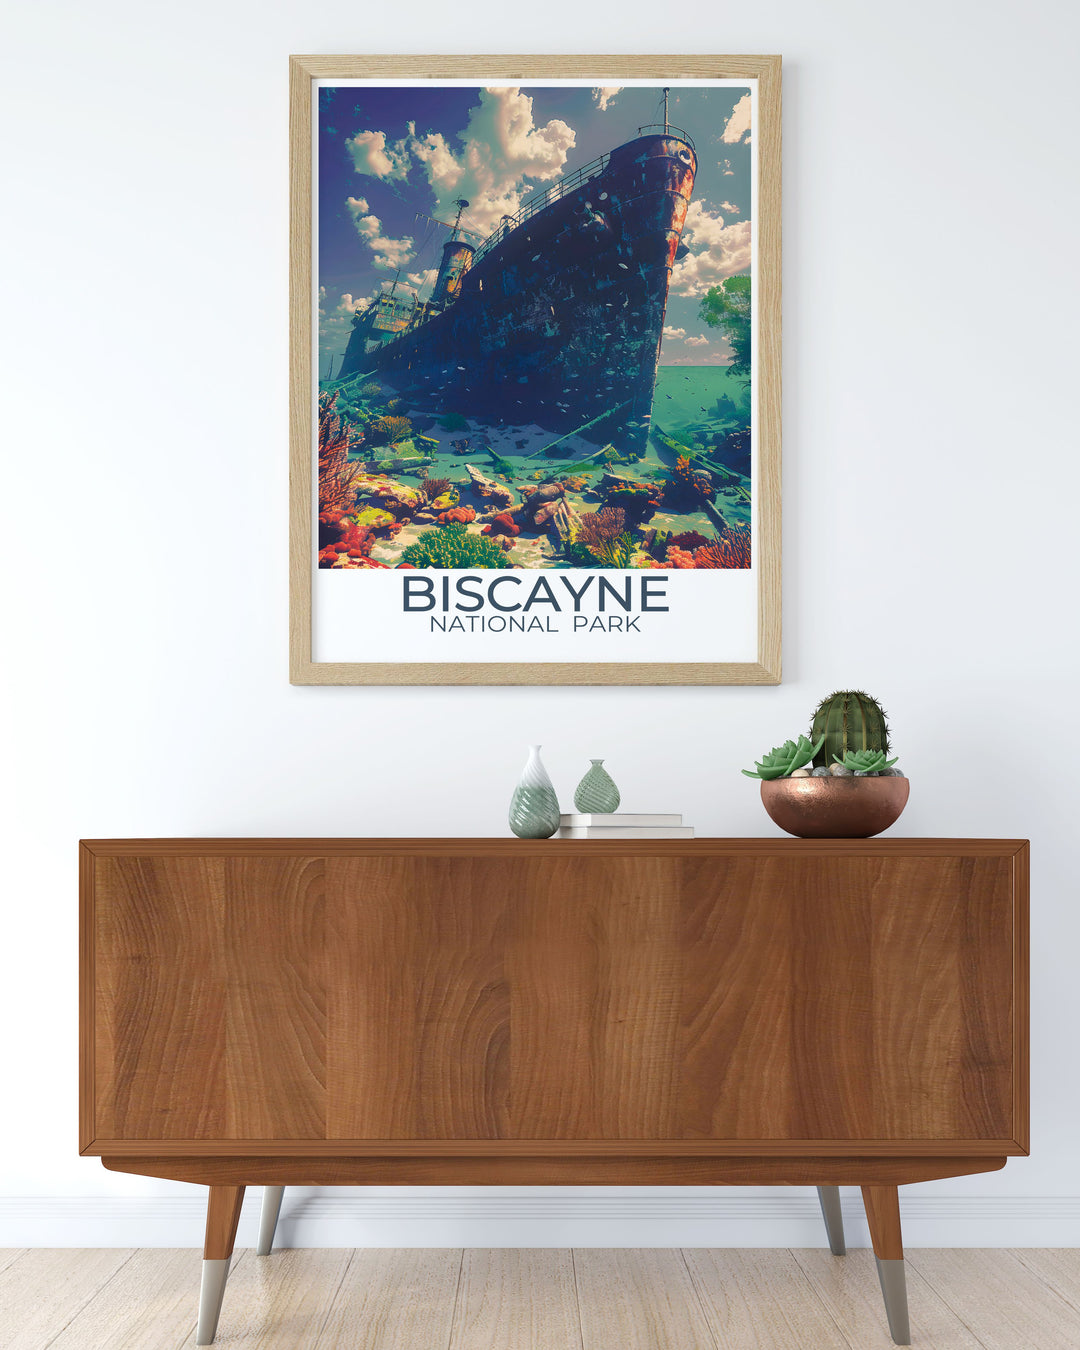 Elegant Biscayne National Park wall art depicting The Maritime Heritage Trail and coral reefs, showcasing the parks natural and underwater beauty. Perfect for adding sophistication and a touch of history to any room.